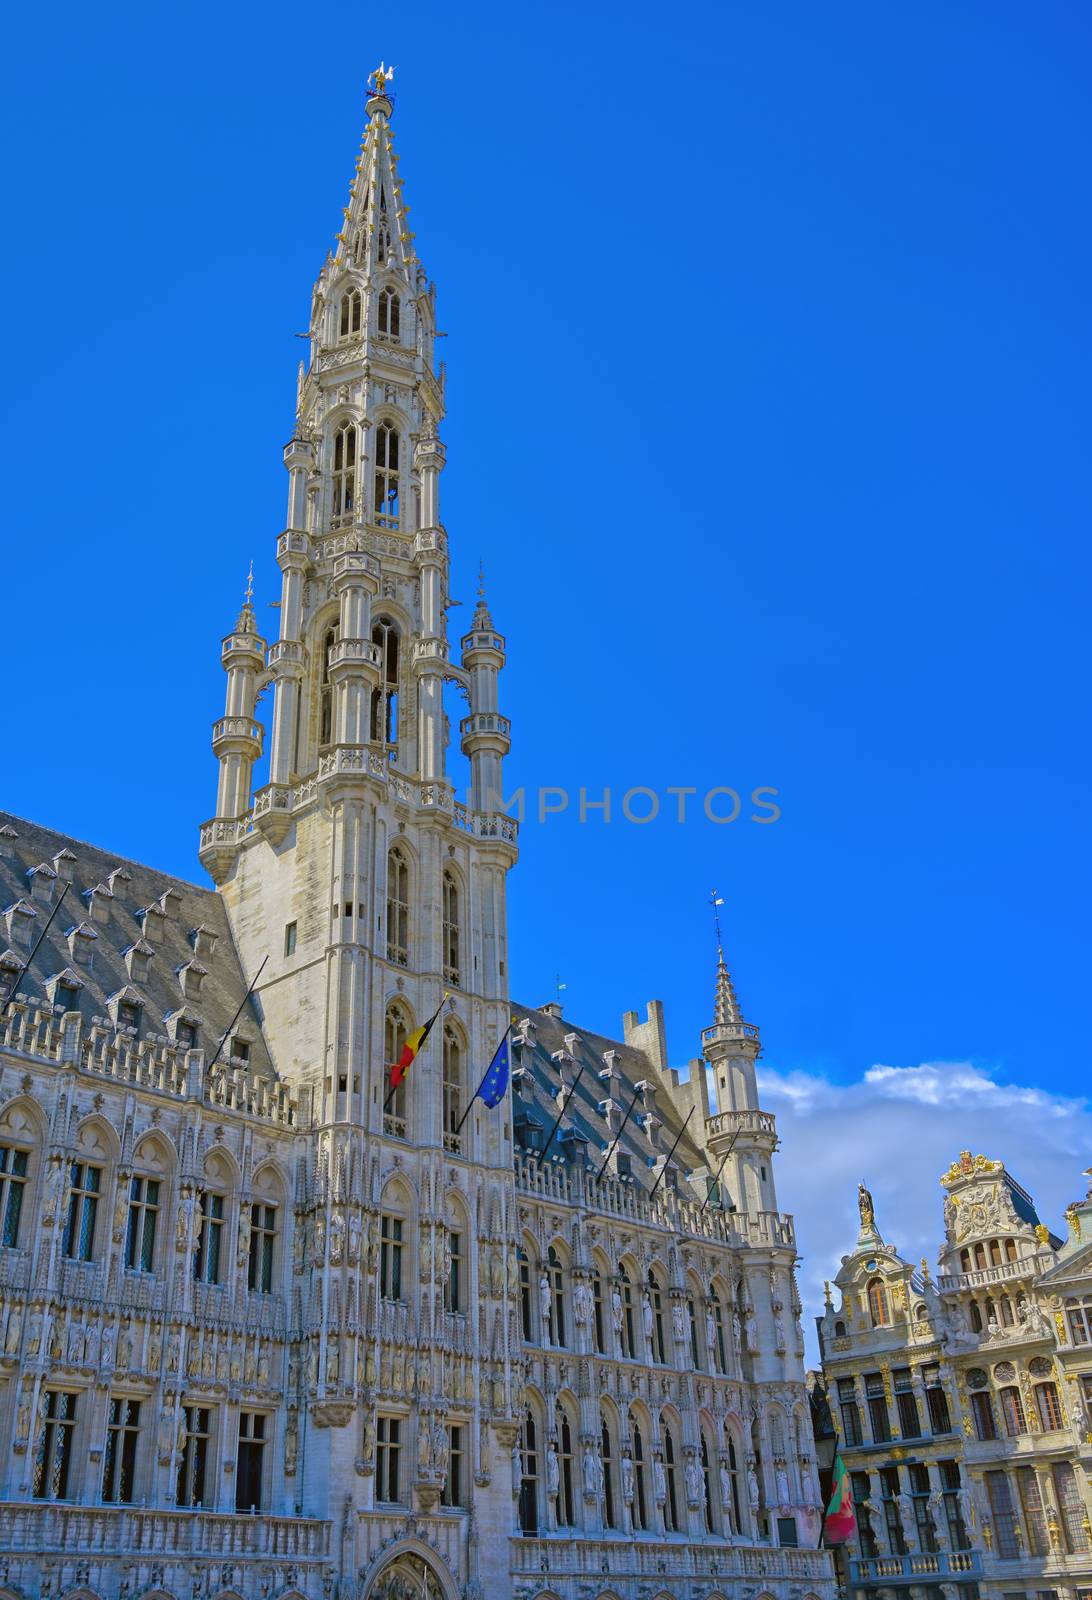 The Town Hall of the City of Brussels is a Gothic building from the Middle Ages. It is located on the famous Grand Place in Brussels, Belgium.